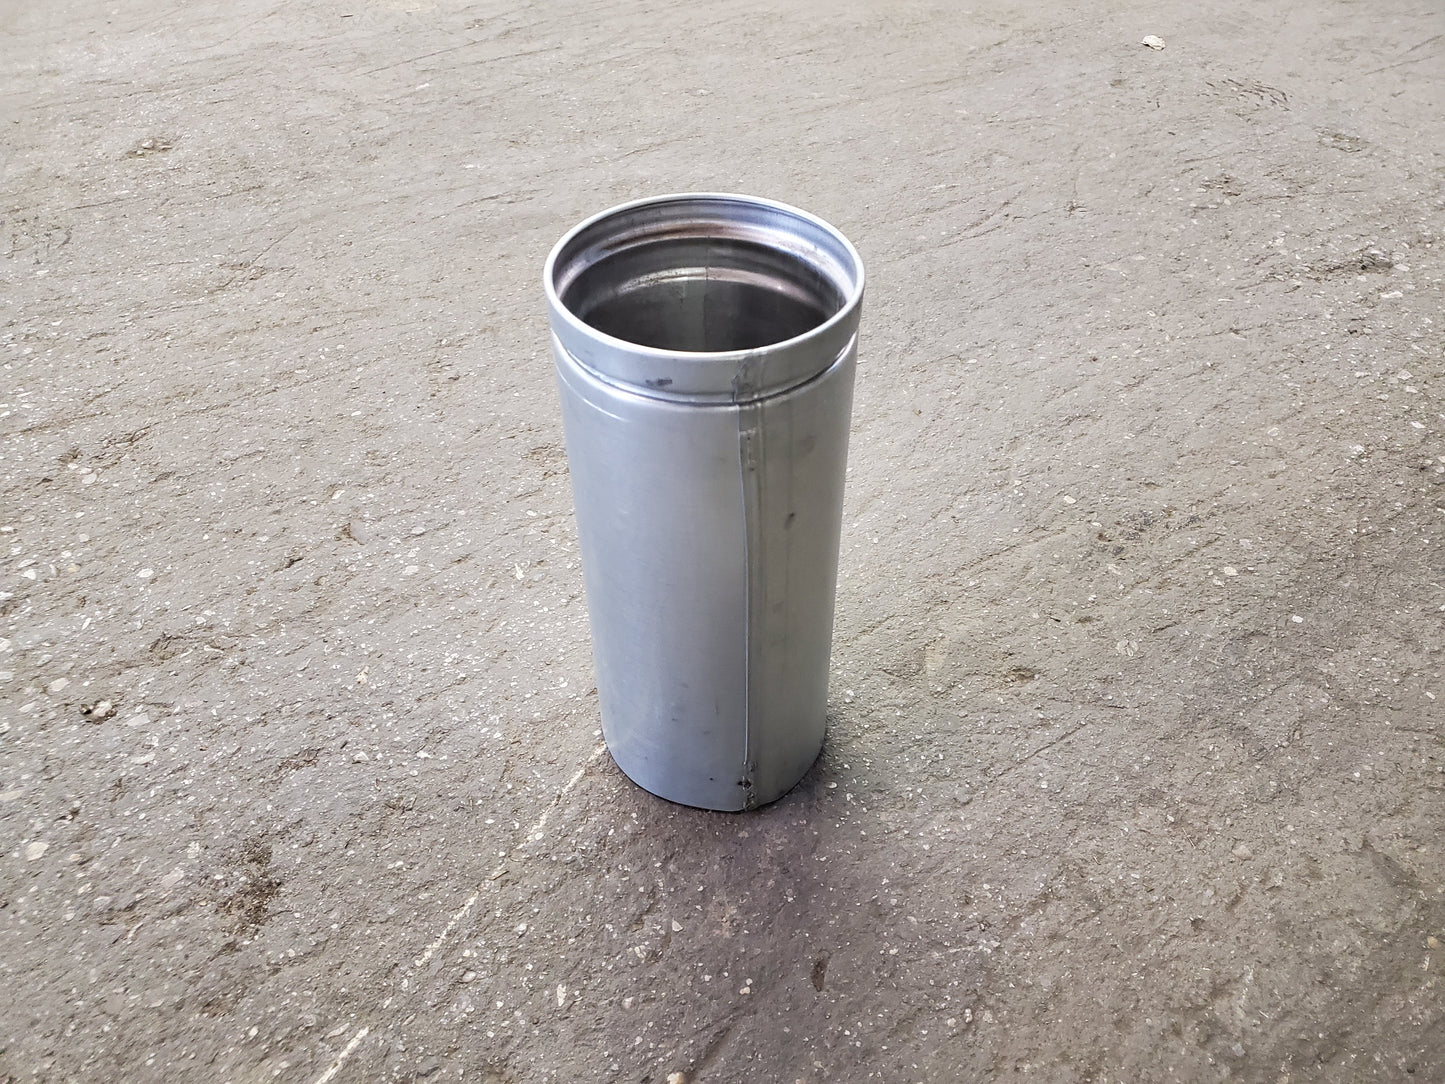 5" X 12" ADJUSTABLE B-VENT ROUND PIPE ADAPTER 